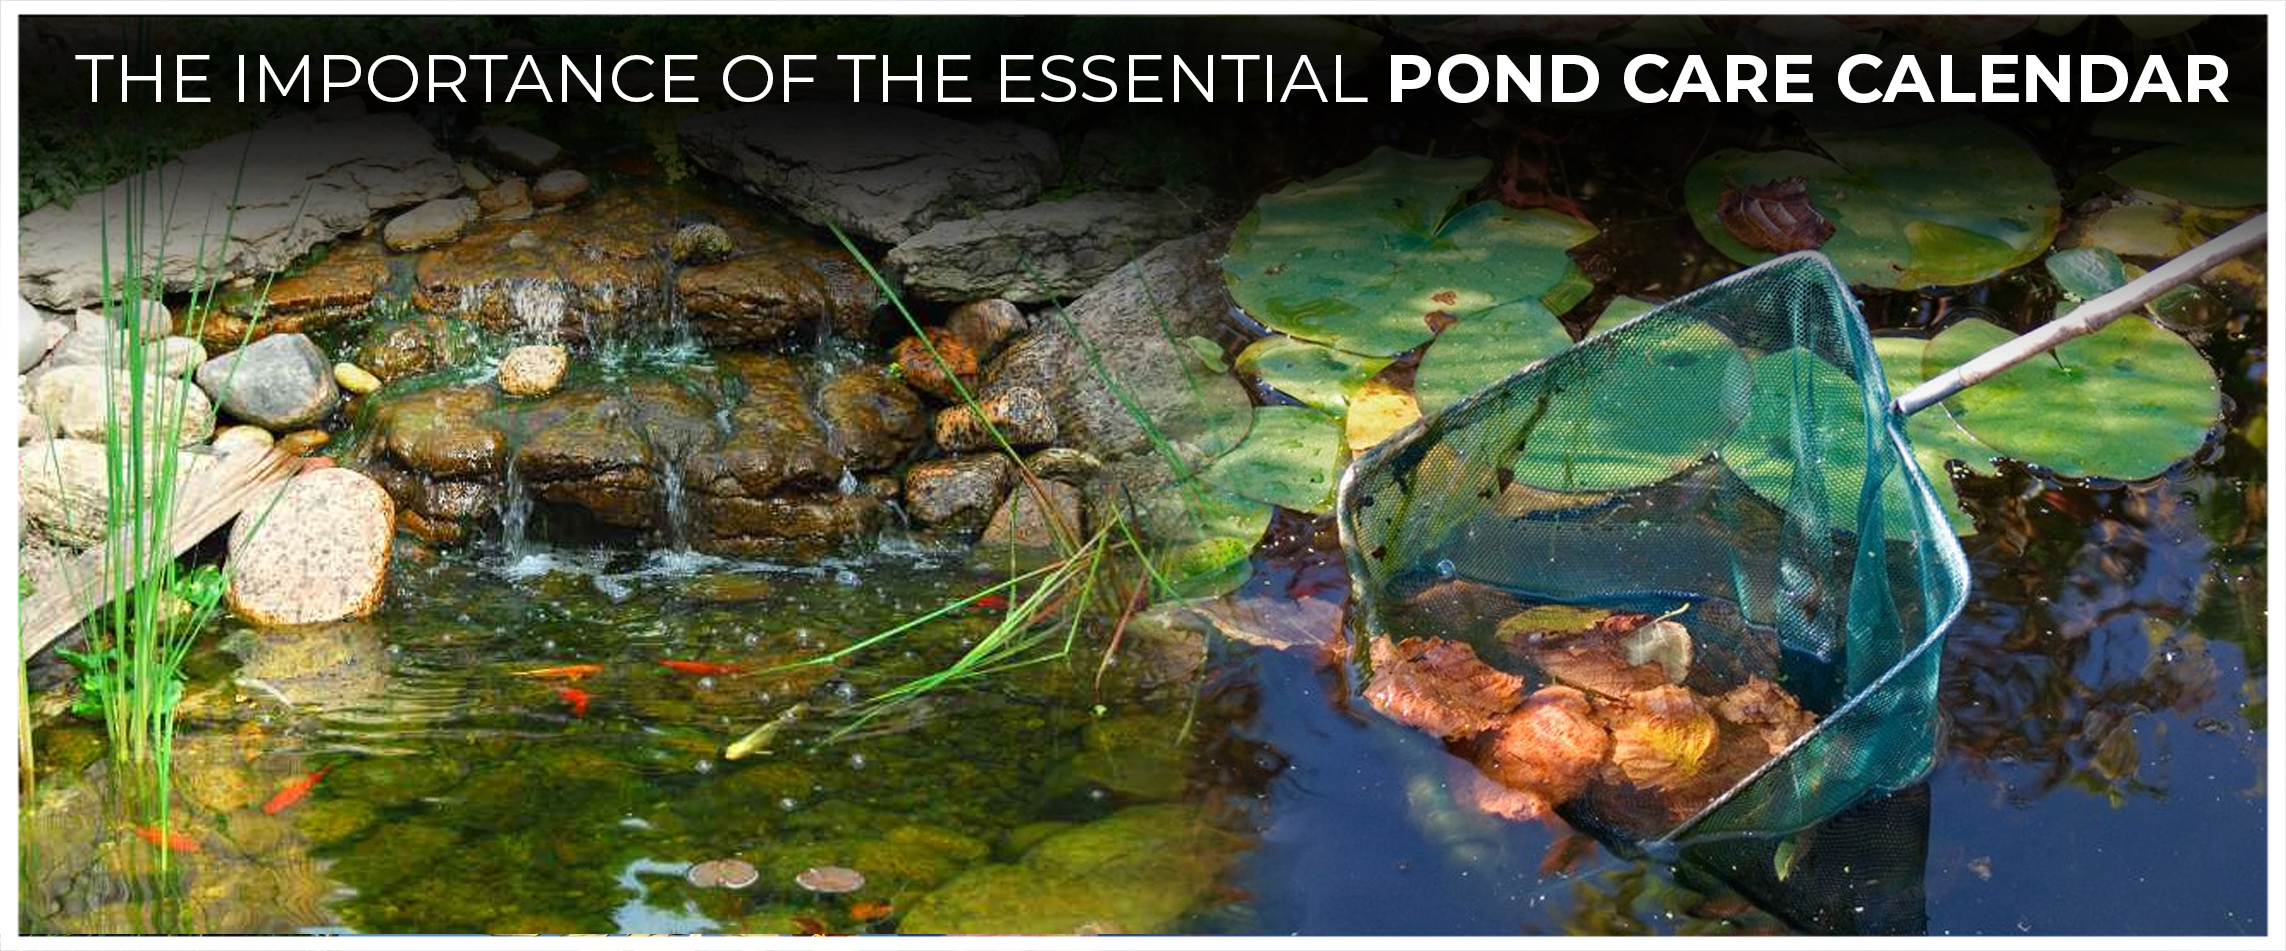 The Importance of The Essential Pond Care Calendar